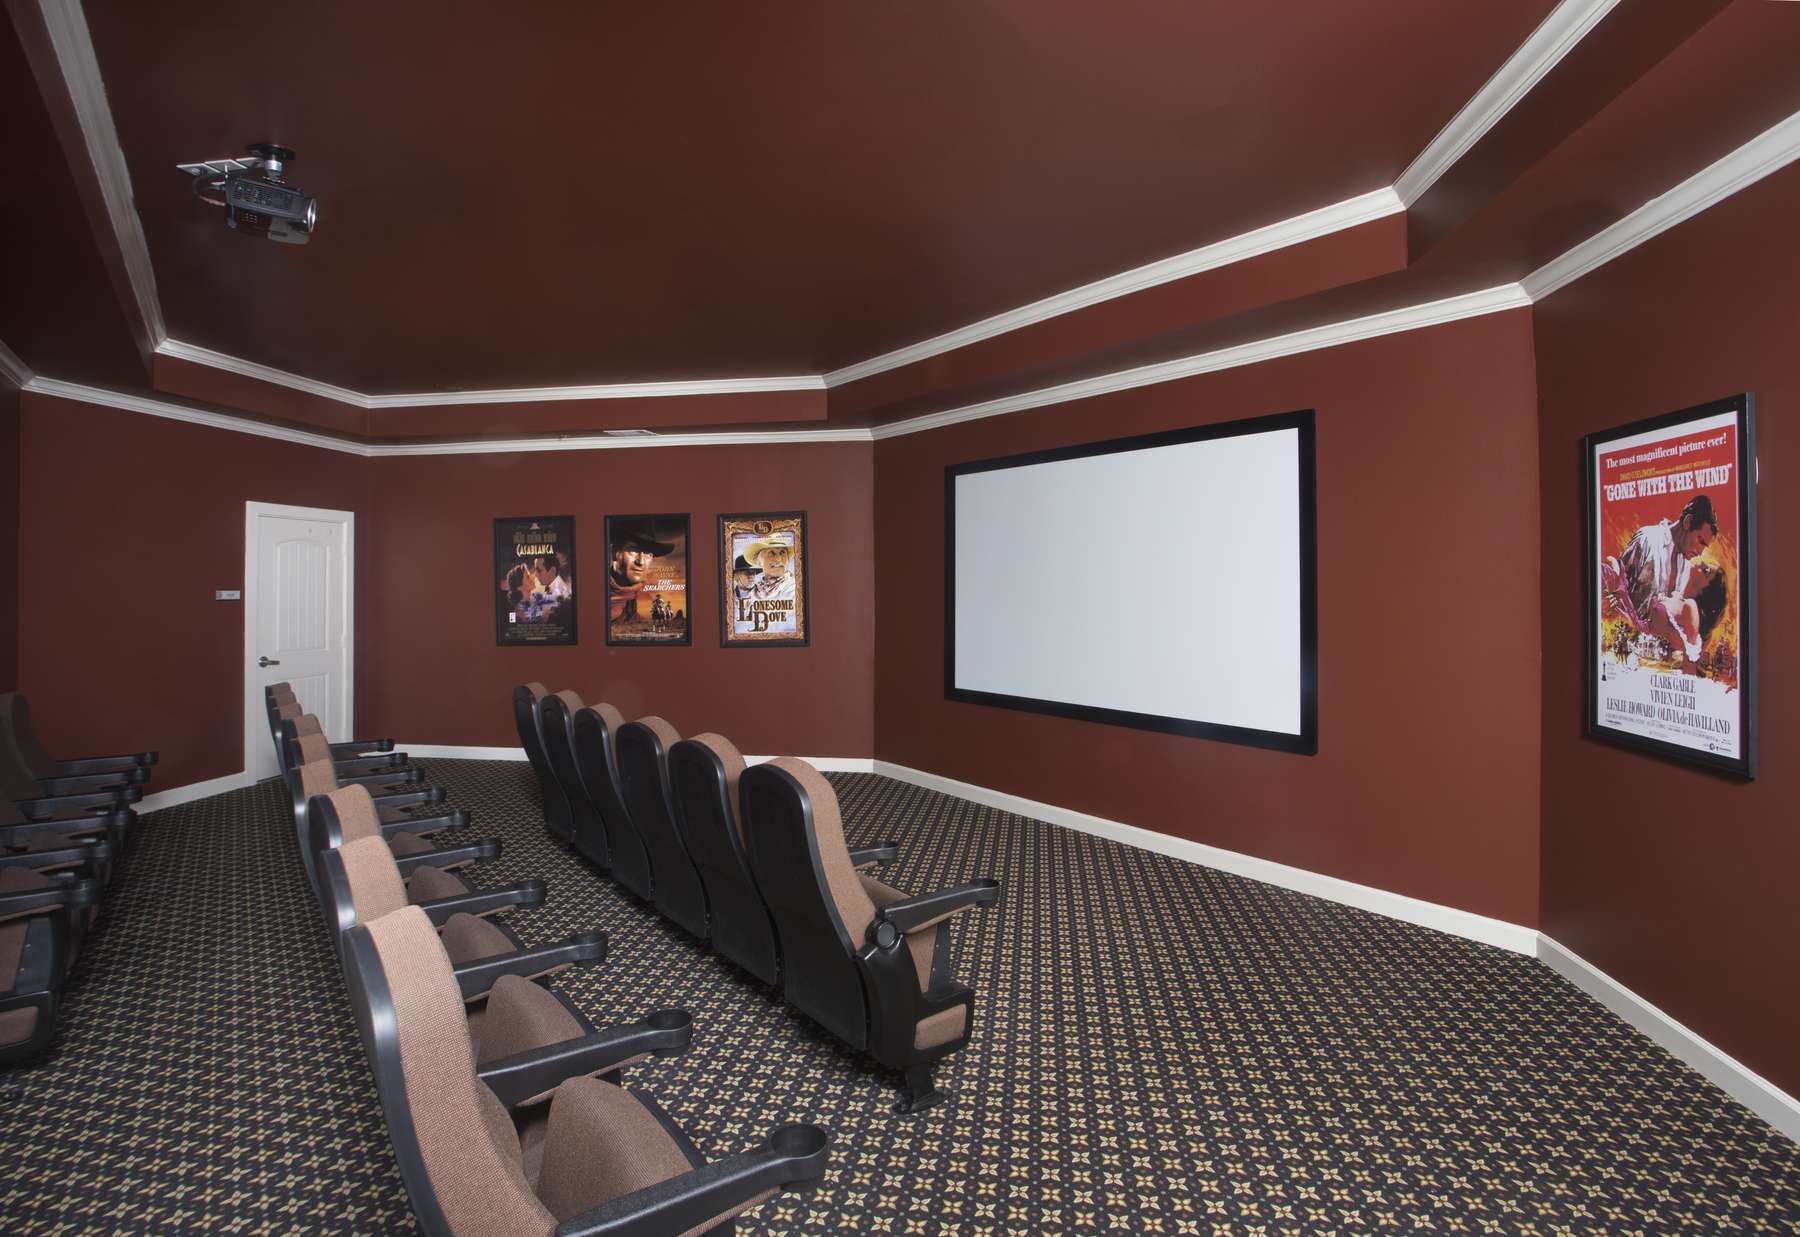 The Claiborne at Thibodaux movie theater with comfortable seating and surround sound